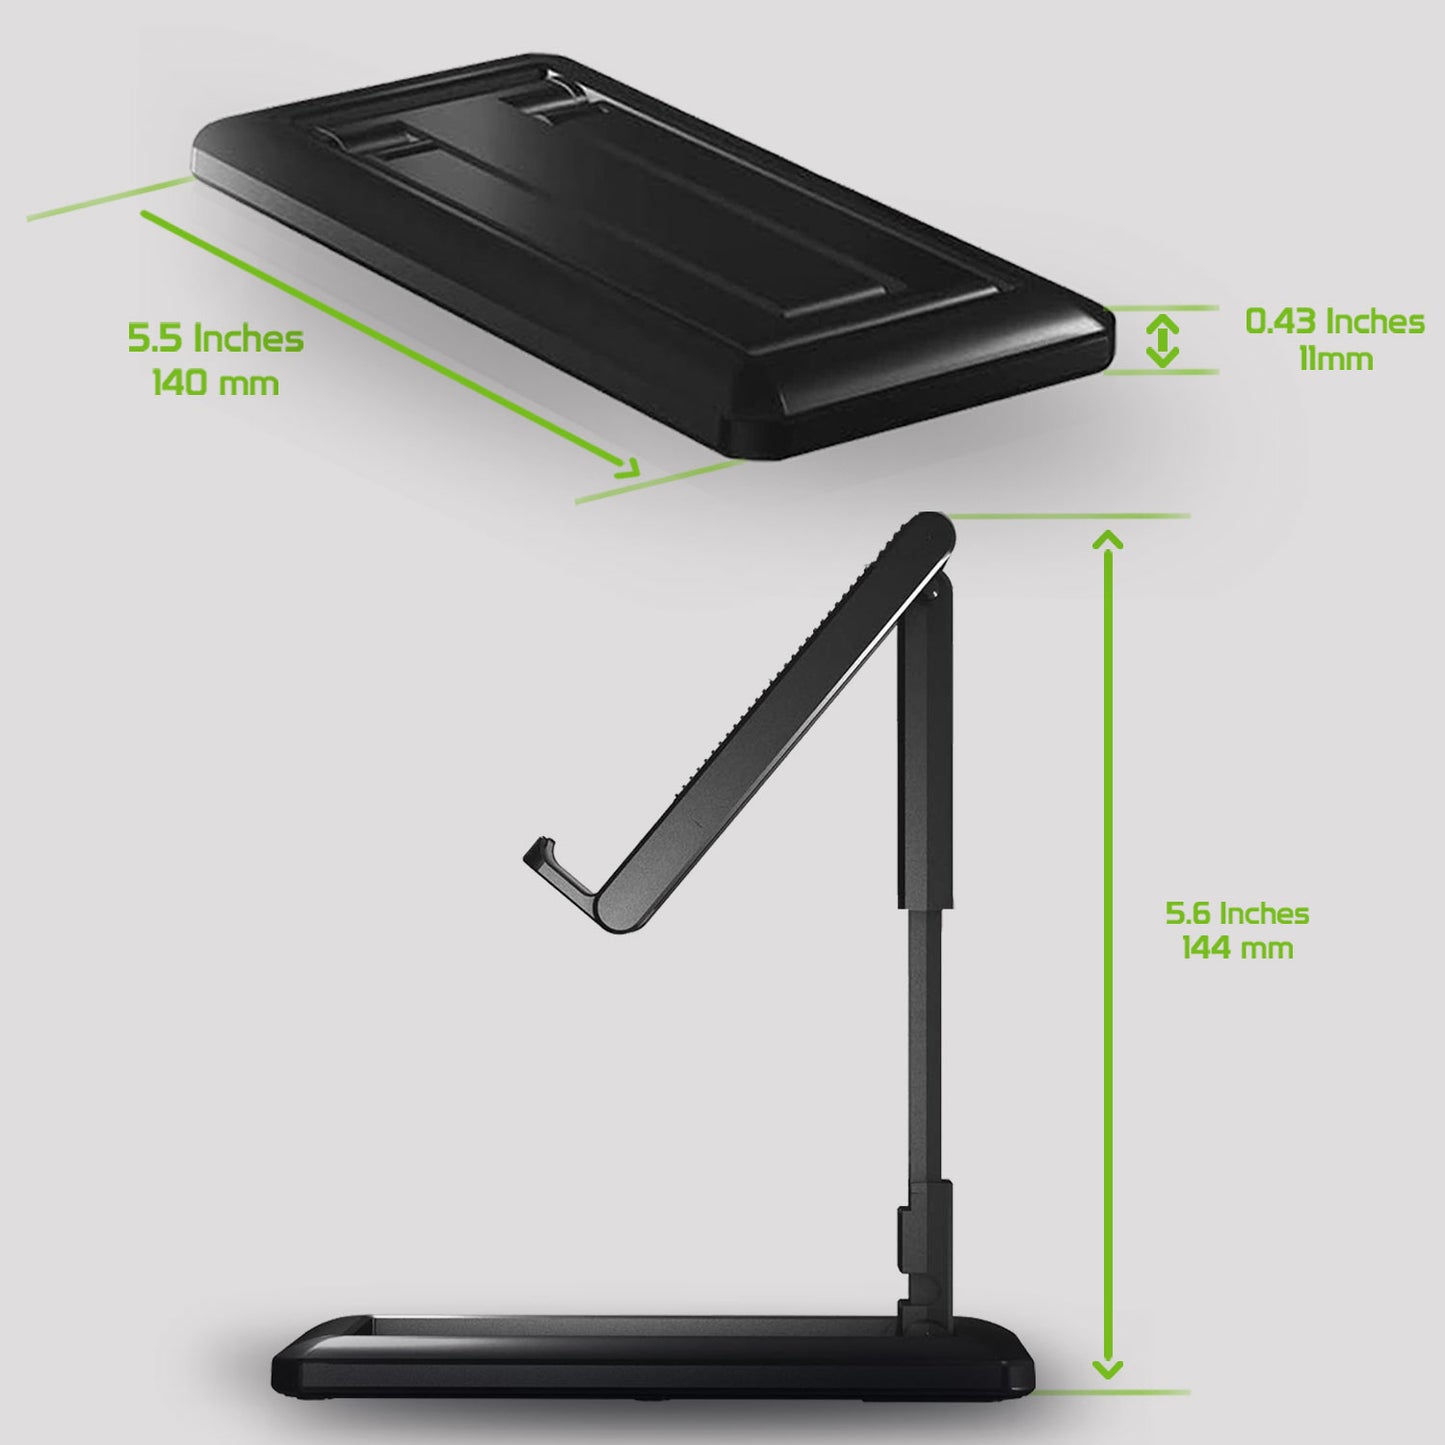 PH140BK - Heavy Duty Adjustable Phone Stand with Non-Slip Rubberized Grips and Base Compatible to Smartphones, Tablets, and iPads - Black